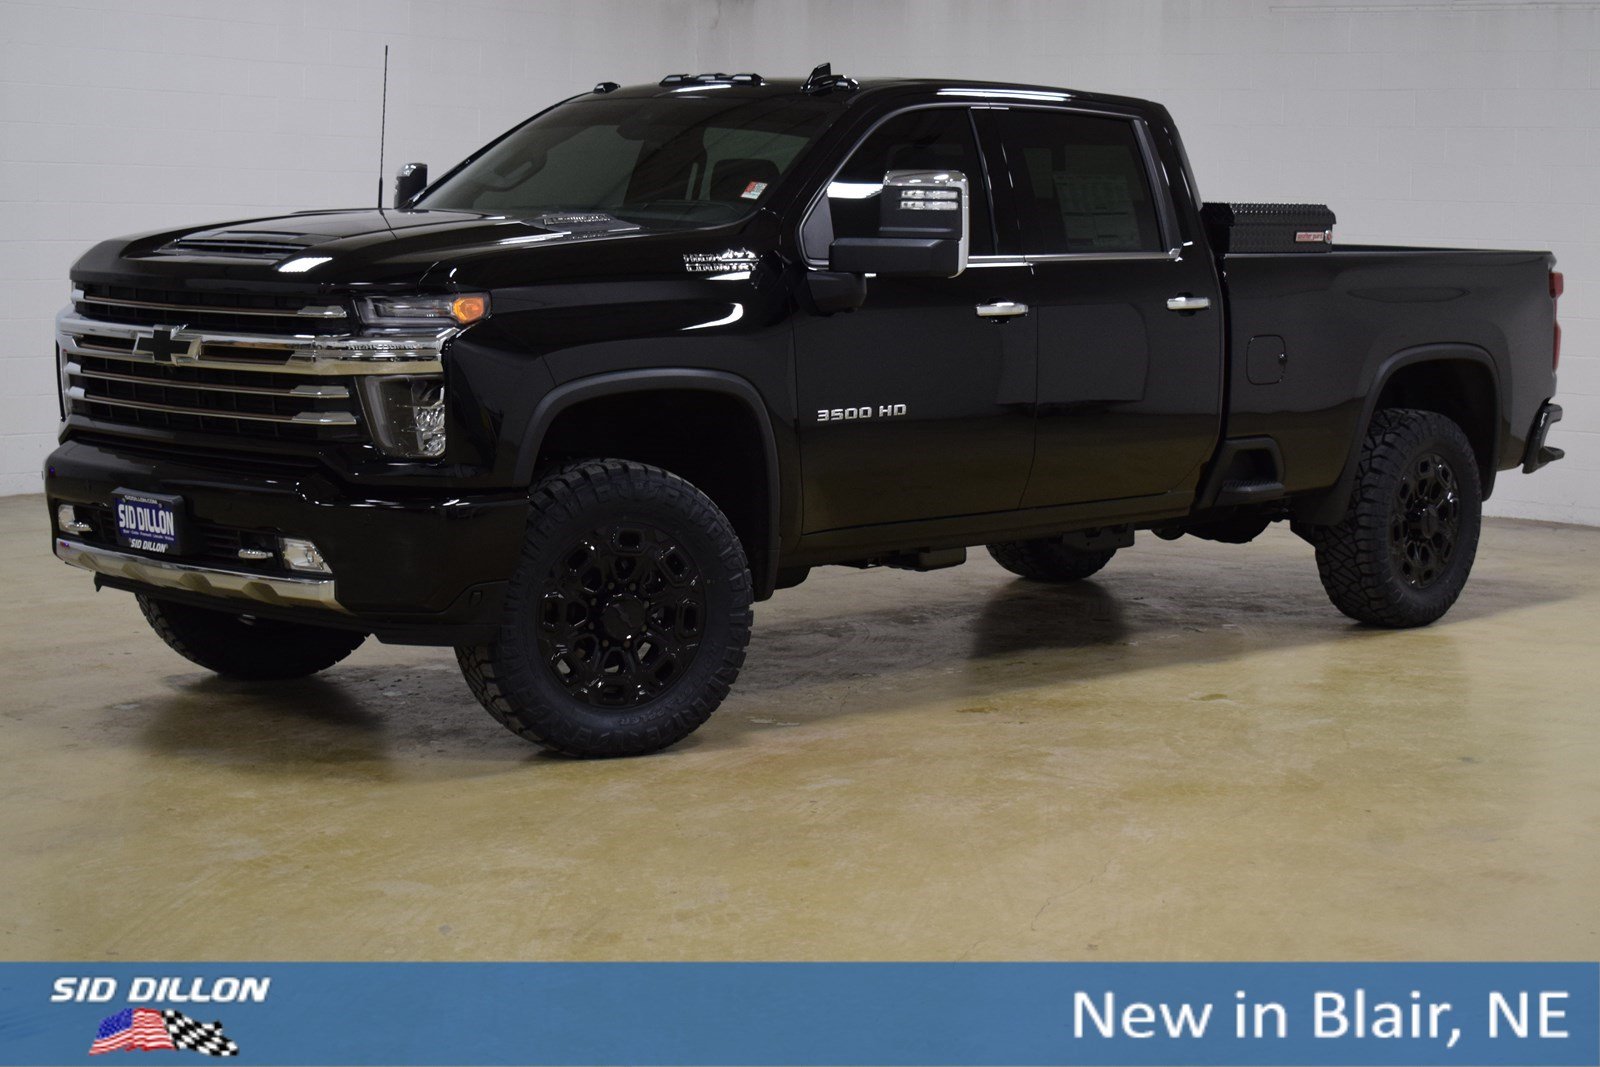 New 2020 Chevrolet Silverado 3500hd High Country With Navigation 4wd